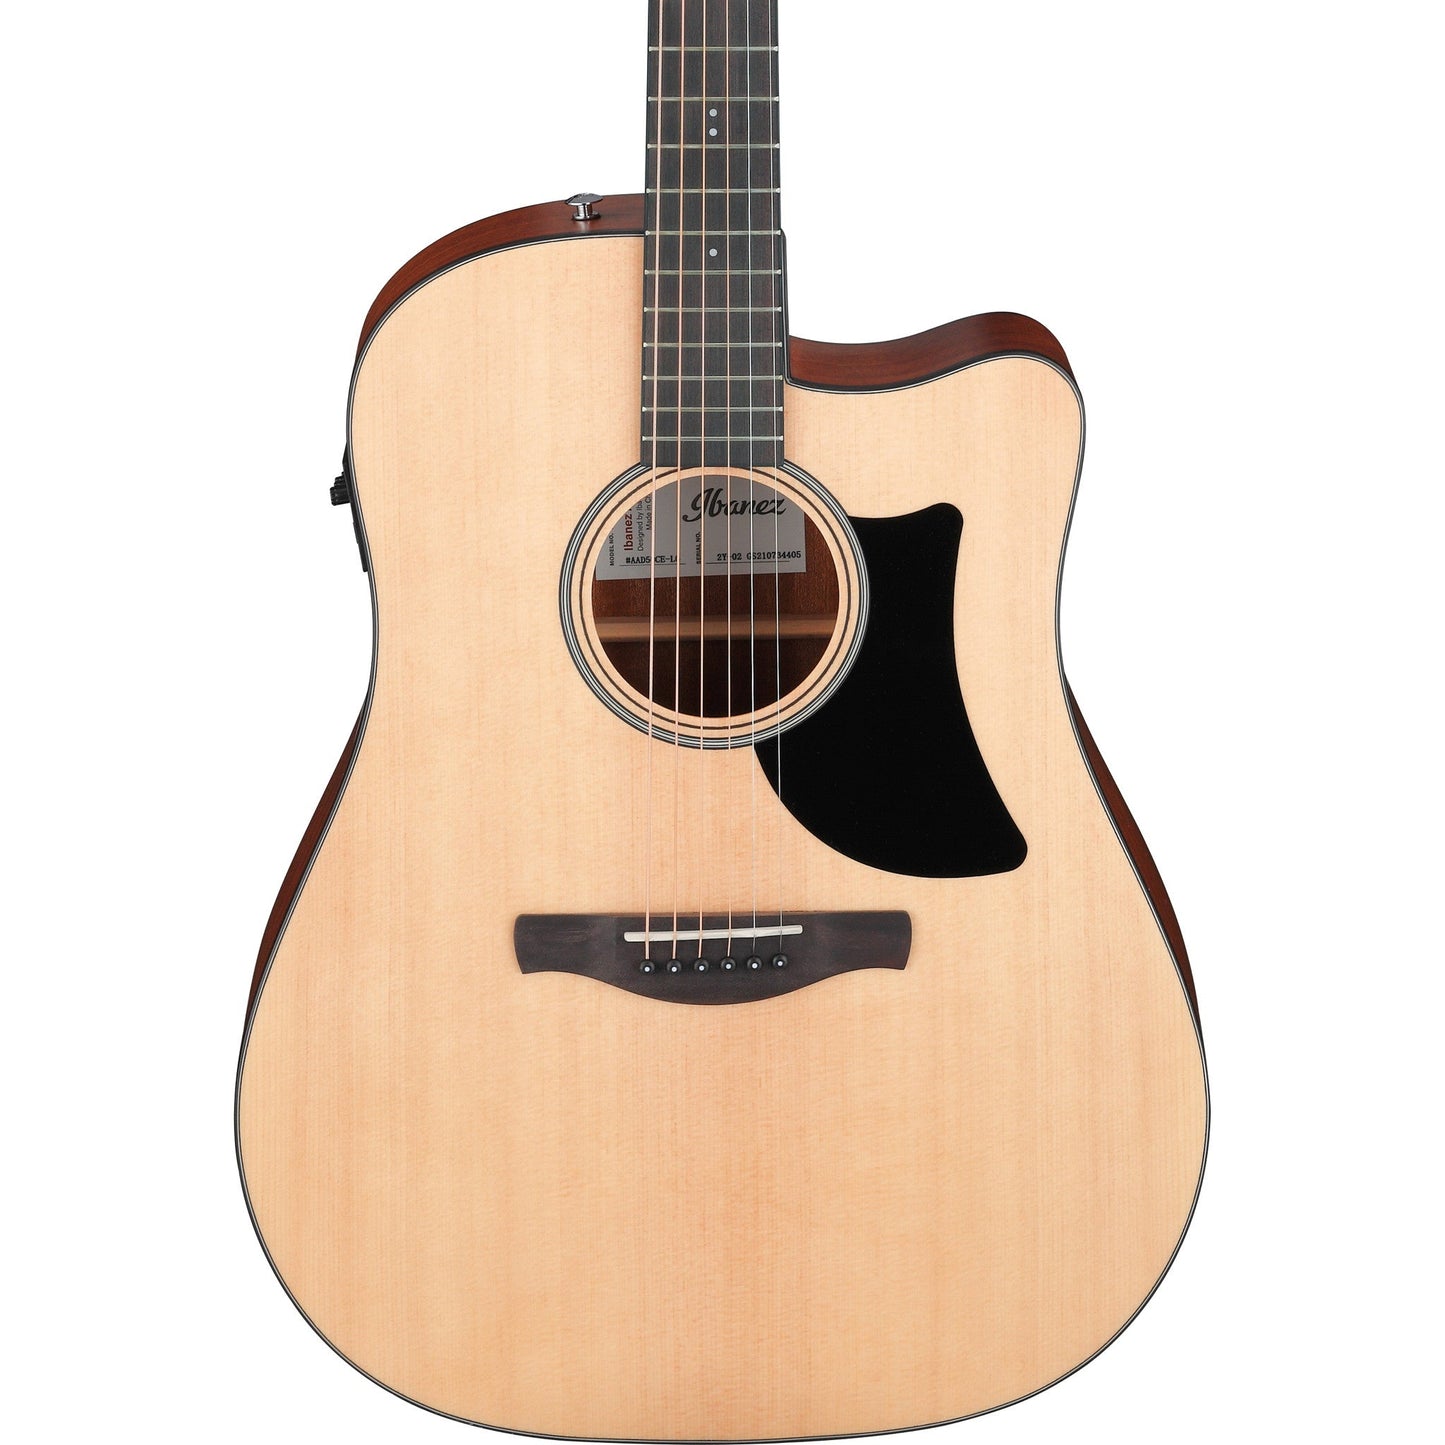 Ibanez AAD50LG Advanced Acoustic Series Acoustic Guitar - Low Gloss